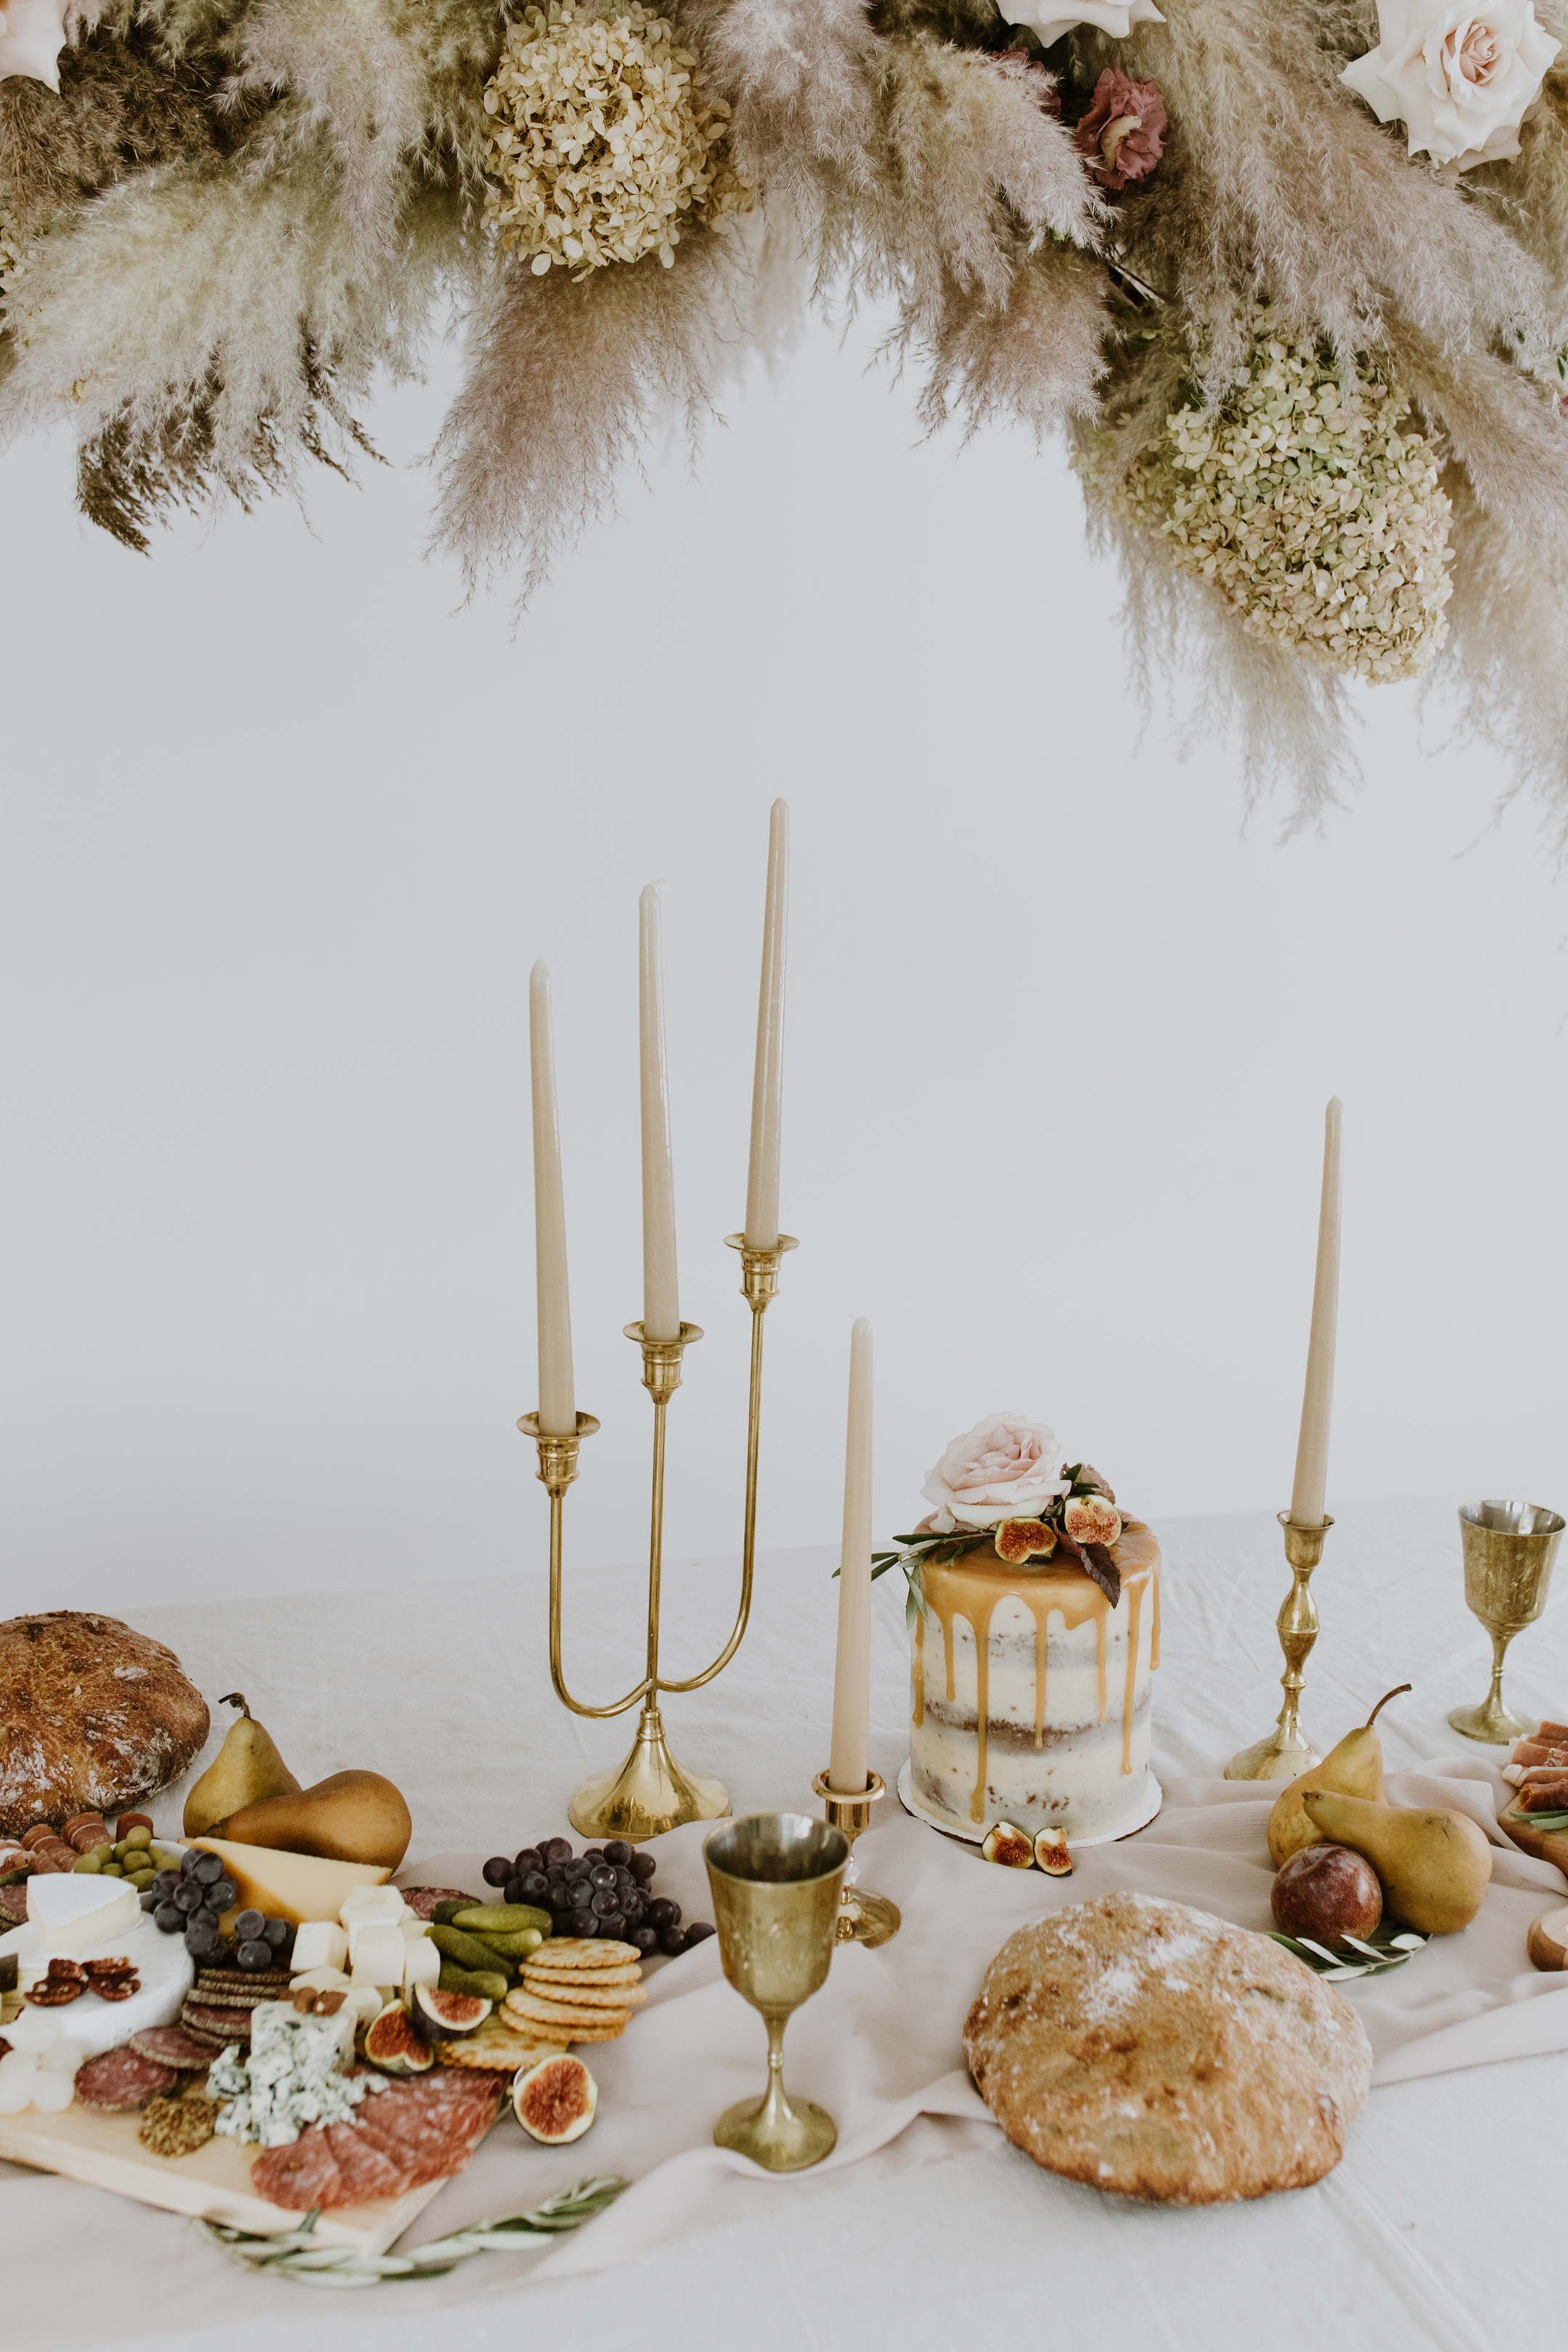 Old-World Romantic Styling Meets Warm Family-Style Gathering // Inspiration Shoot at Spruce Meadows